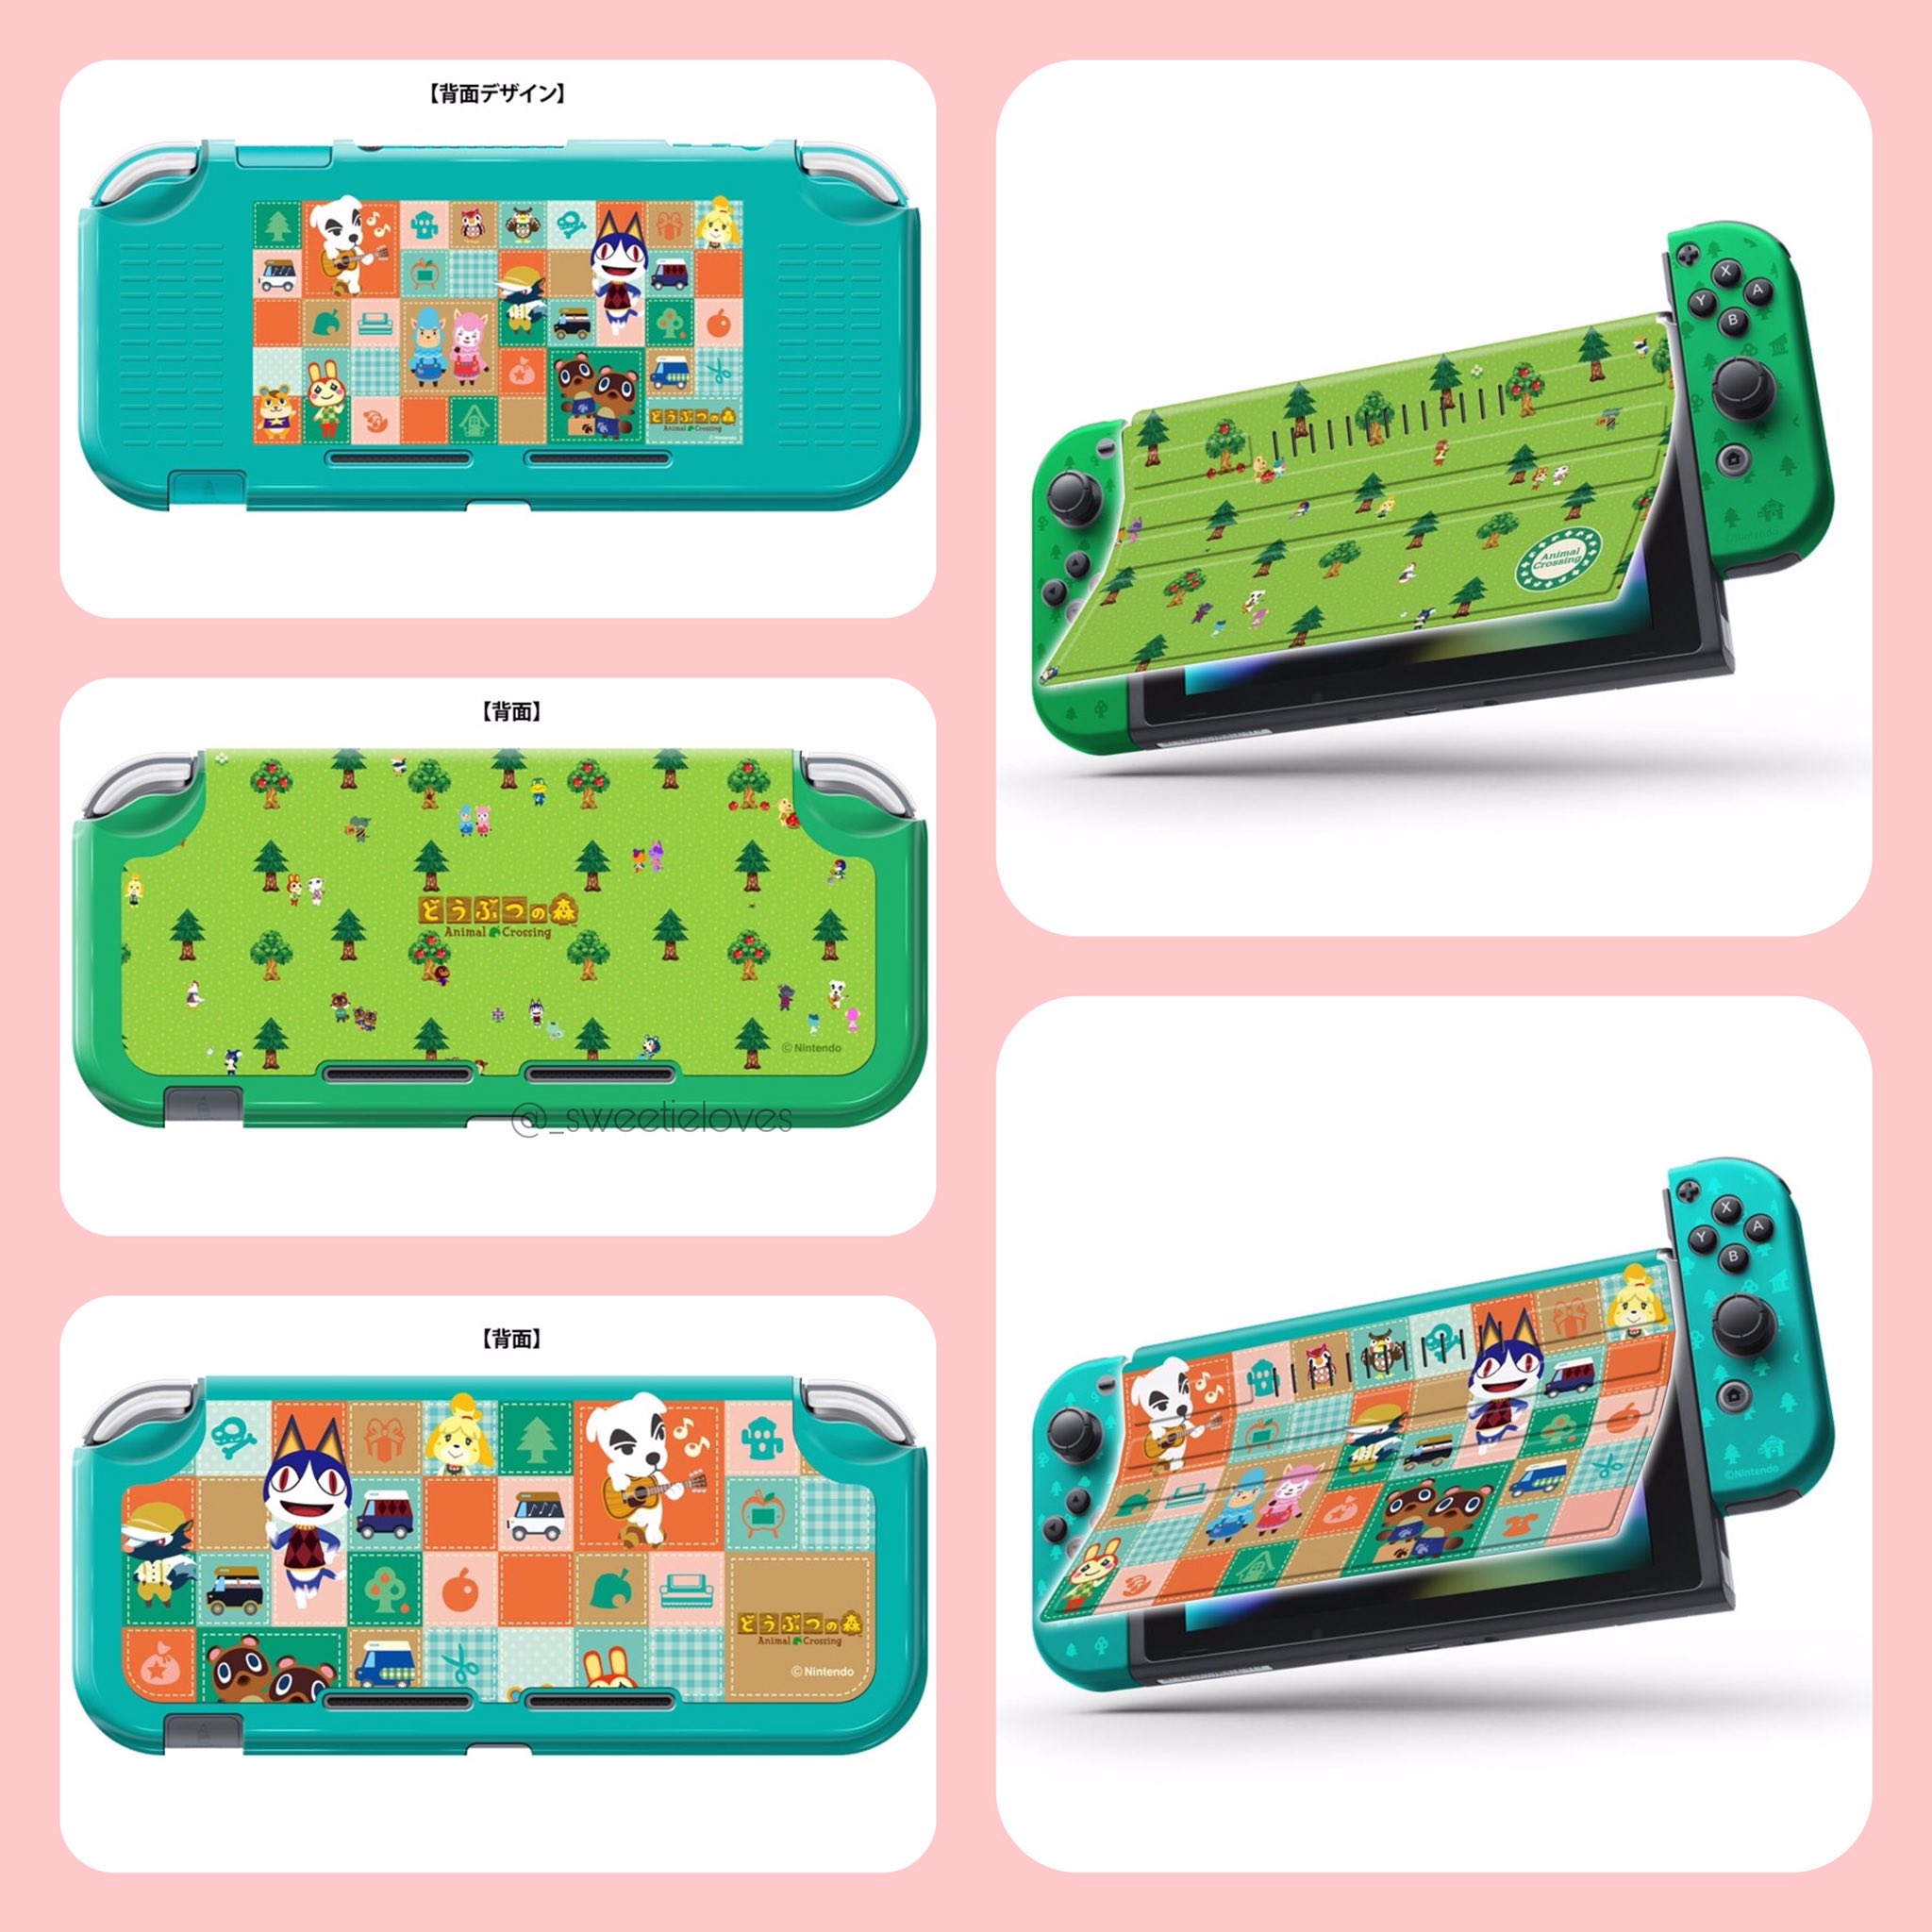 🦜♡ Lala ♡🐦 on Twitter: "🌱 New Accessories for Nintendo Switch 🌱 For the moment it's available HMV #AnimalCrossingNewHorizons https://t.co/MbYbEXsZ3F" / Twitter